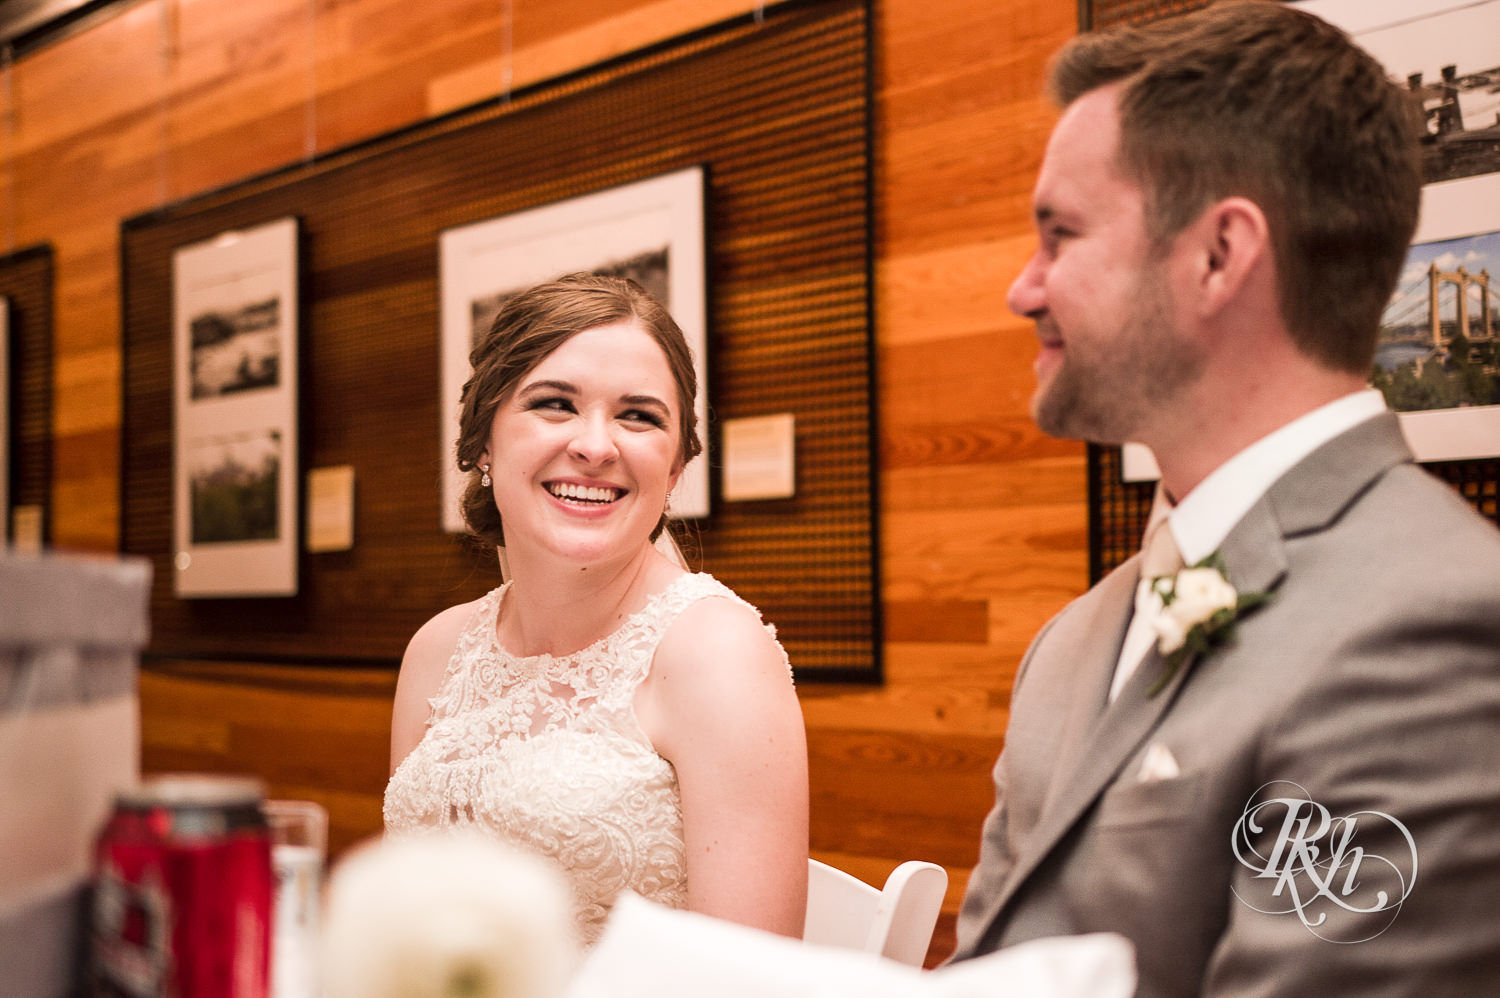 Bride and groom smile during wedding reception at Mill City Museum in Minneapolis, Minnesota.